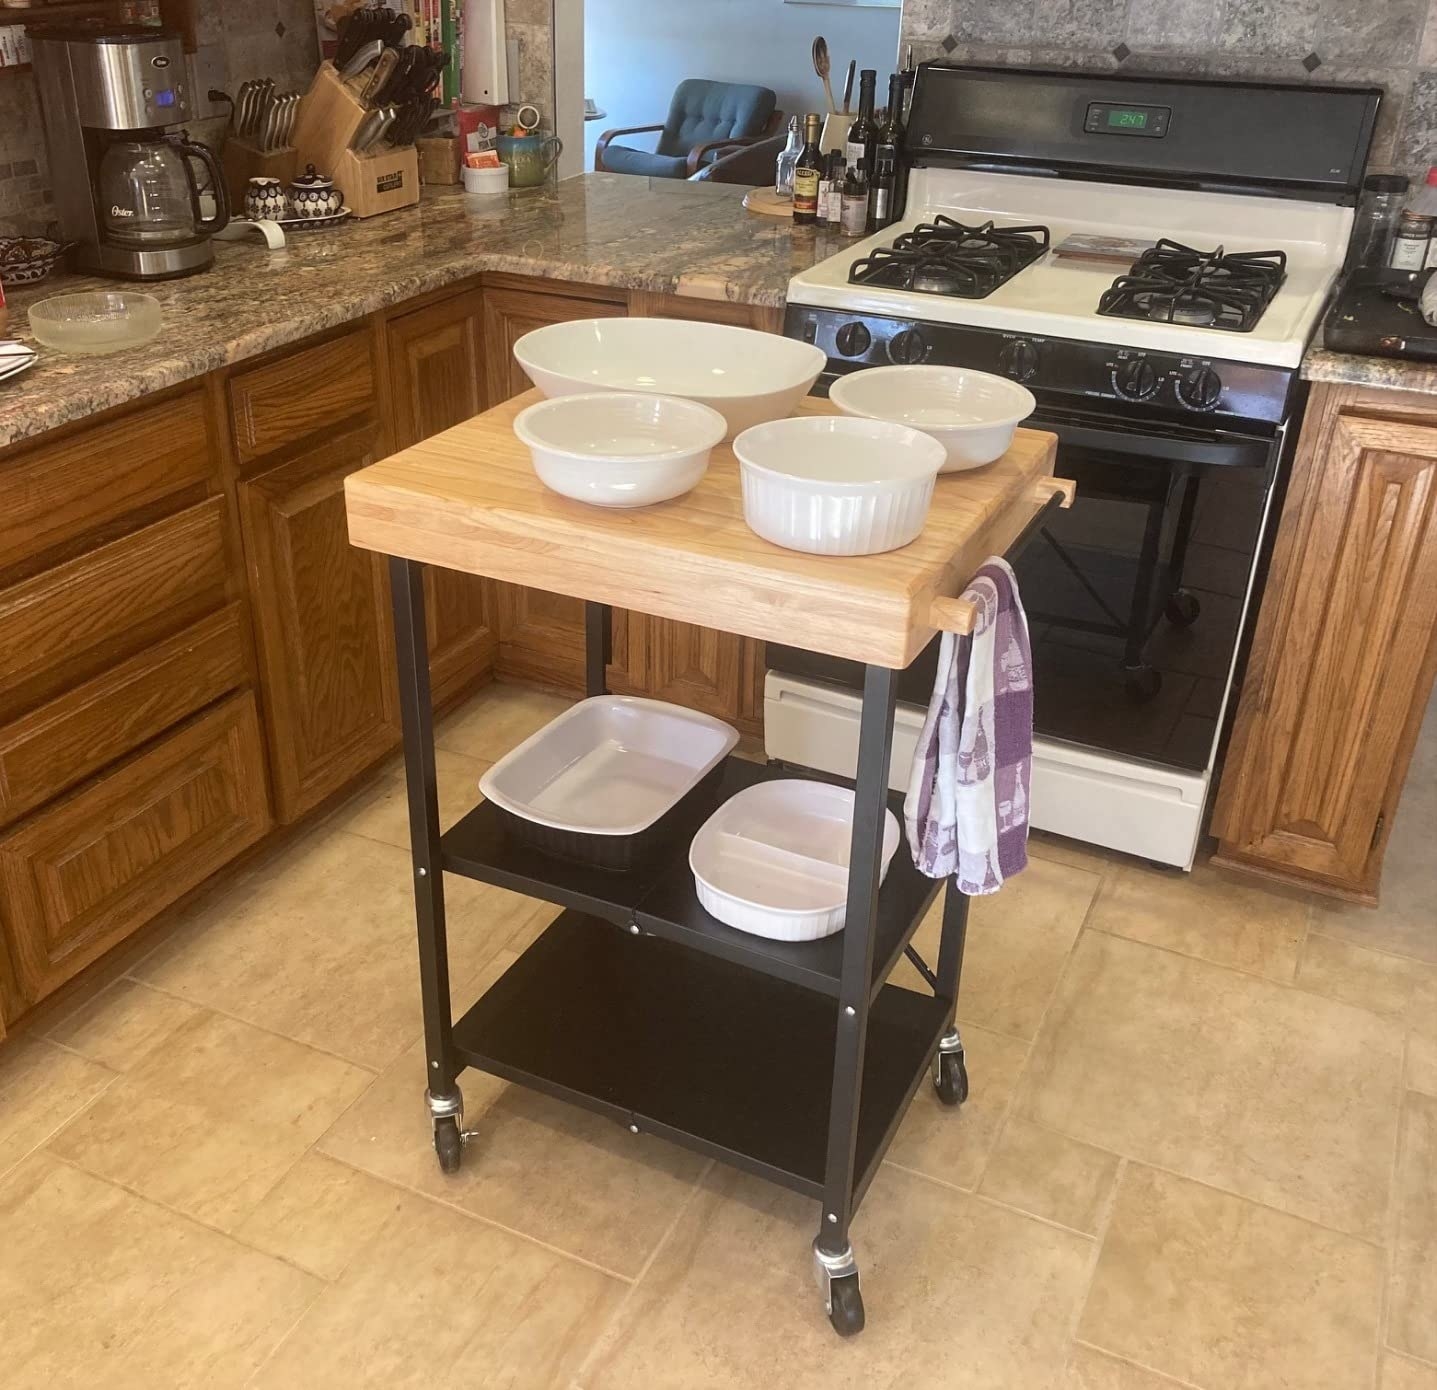 Reviewer photo of the kitchen cart